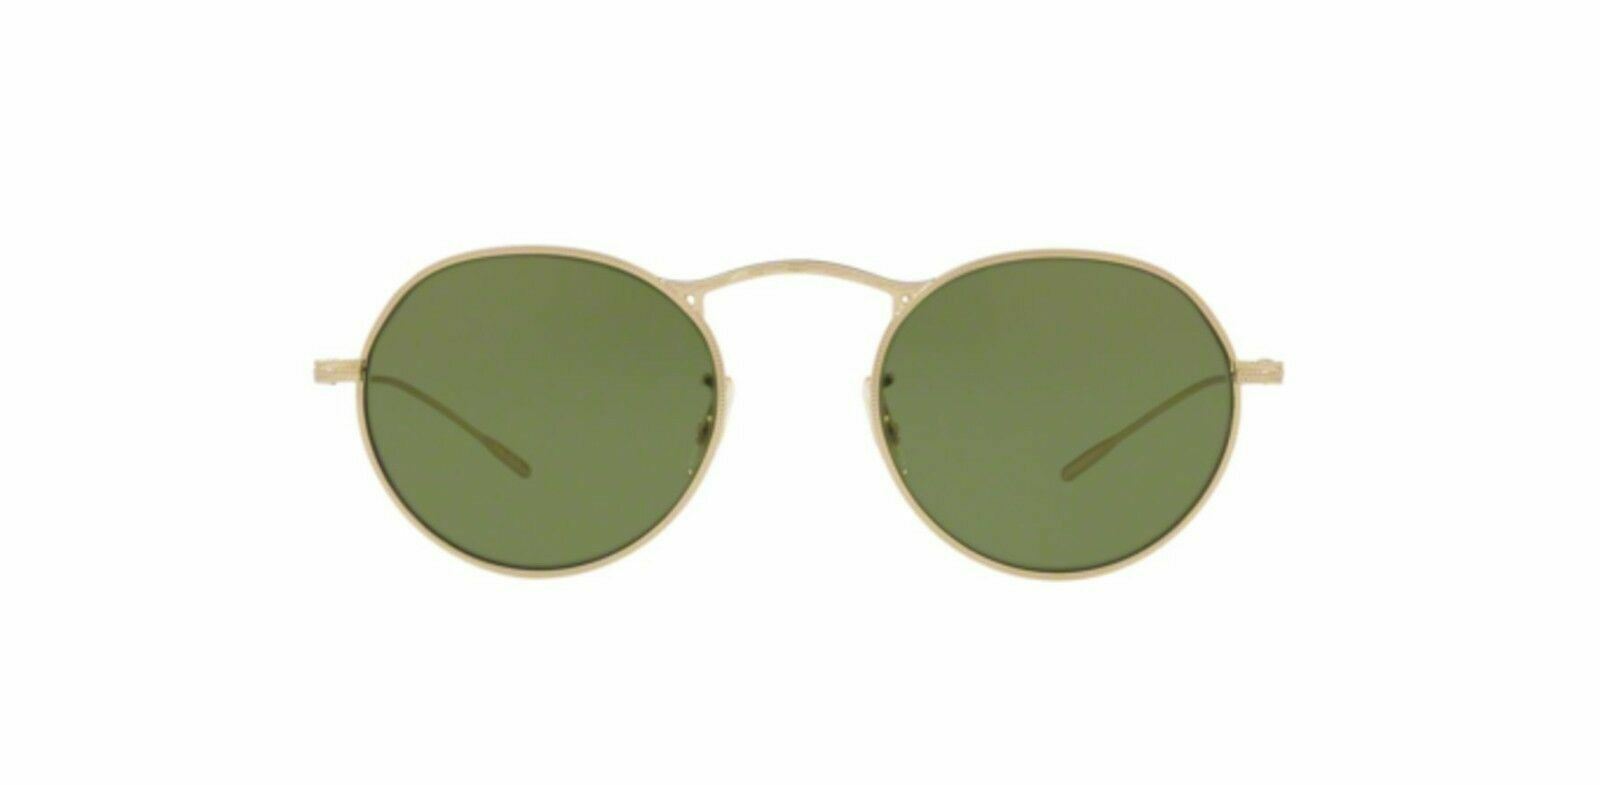 NEW OLIVER PEOPLES OV 1220S M-4 30TH 503552 SOFT GOLD SUNGLASSES.